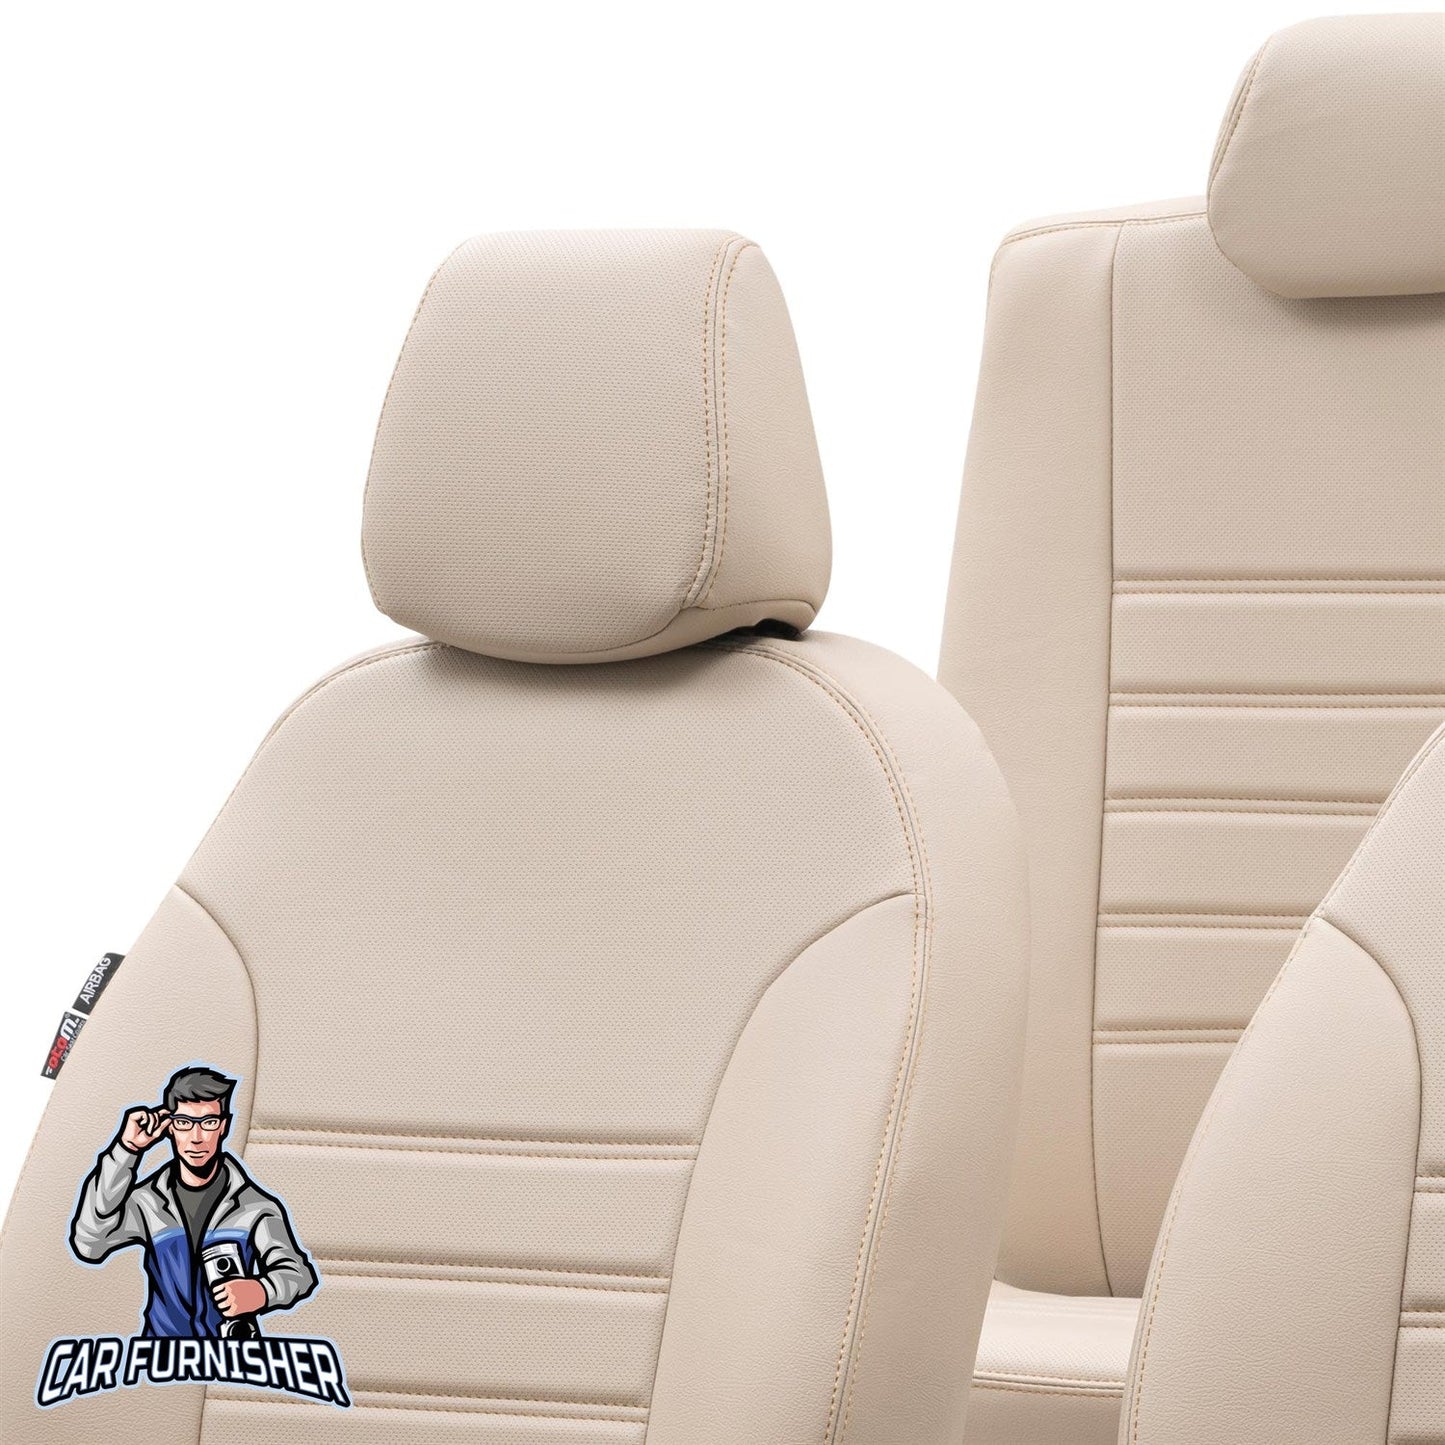 Jeep Grand Cherokee Seat Cover Istanbul Leather Design Beige Leather